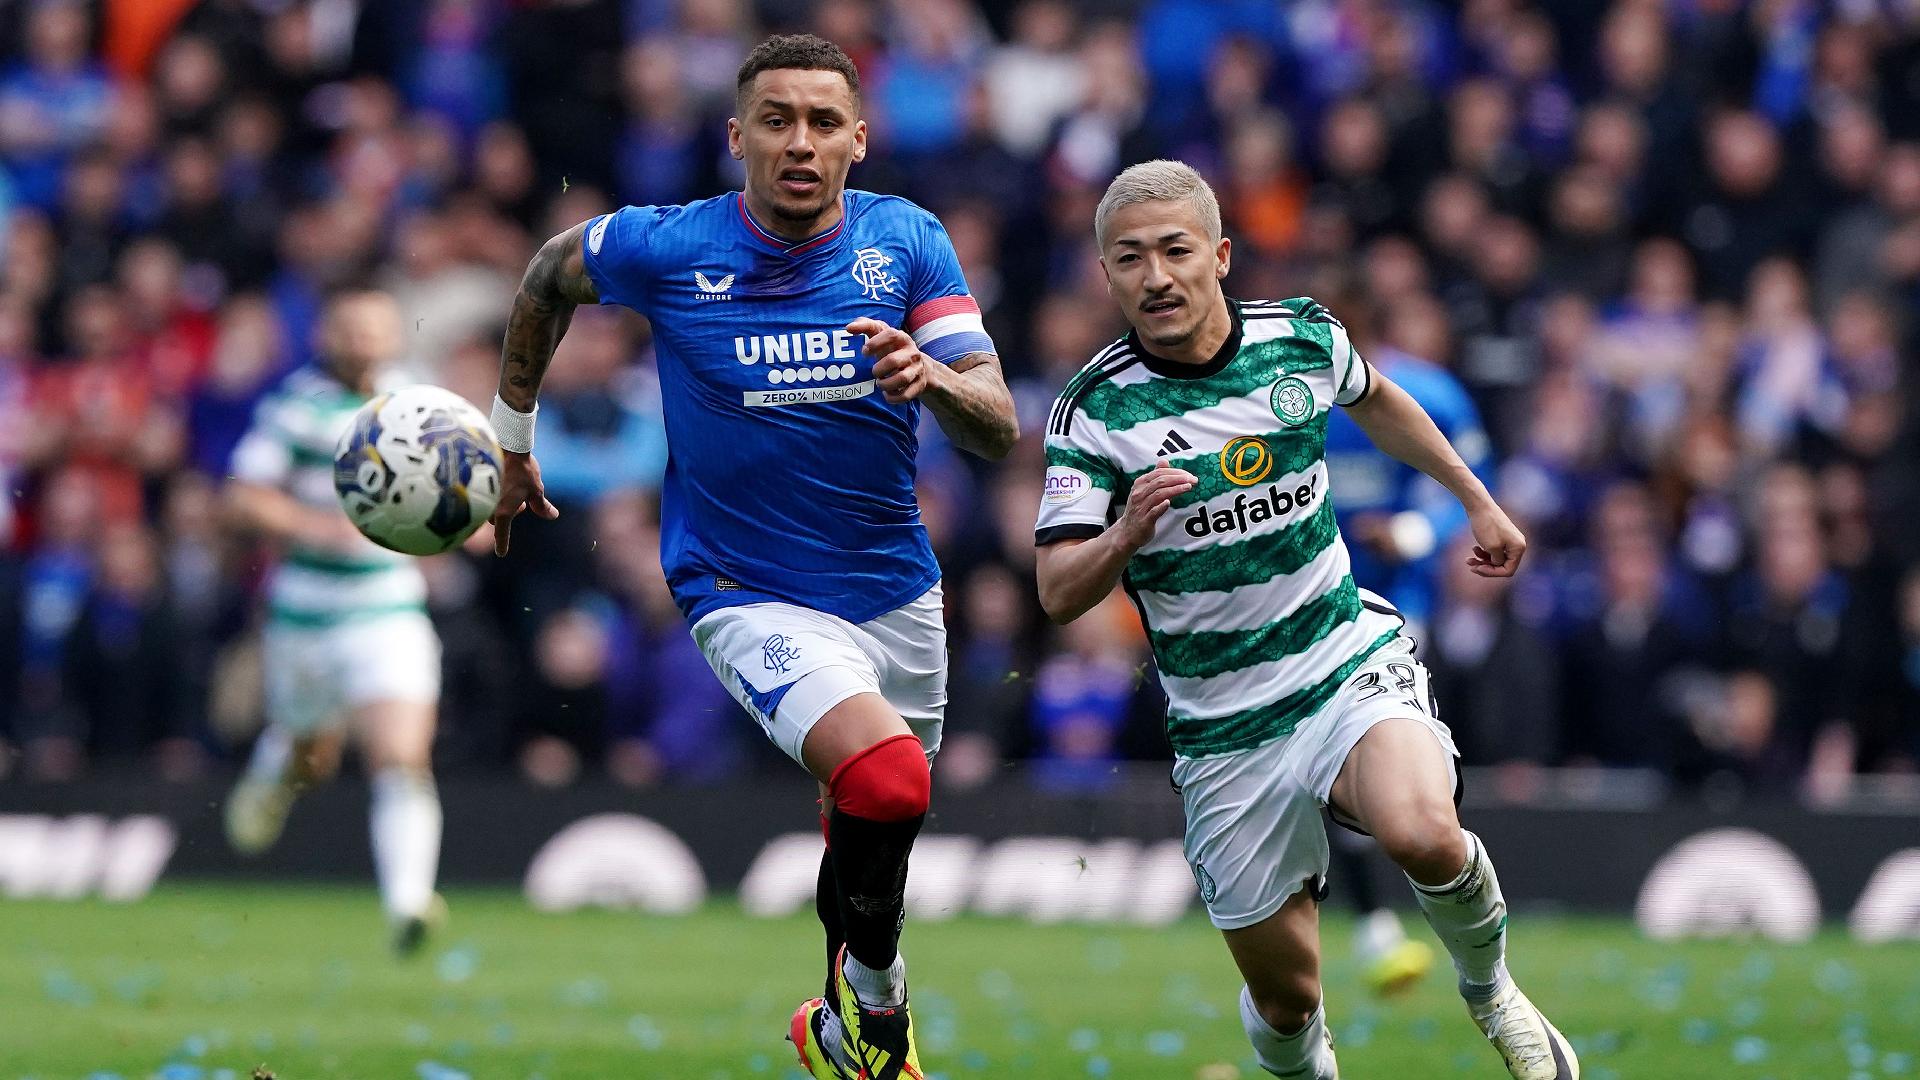 Celtic’s Daizen Maeda set for spell on sidelines with hamstring injury